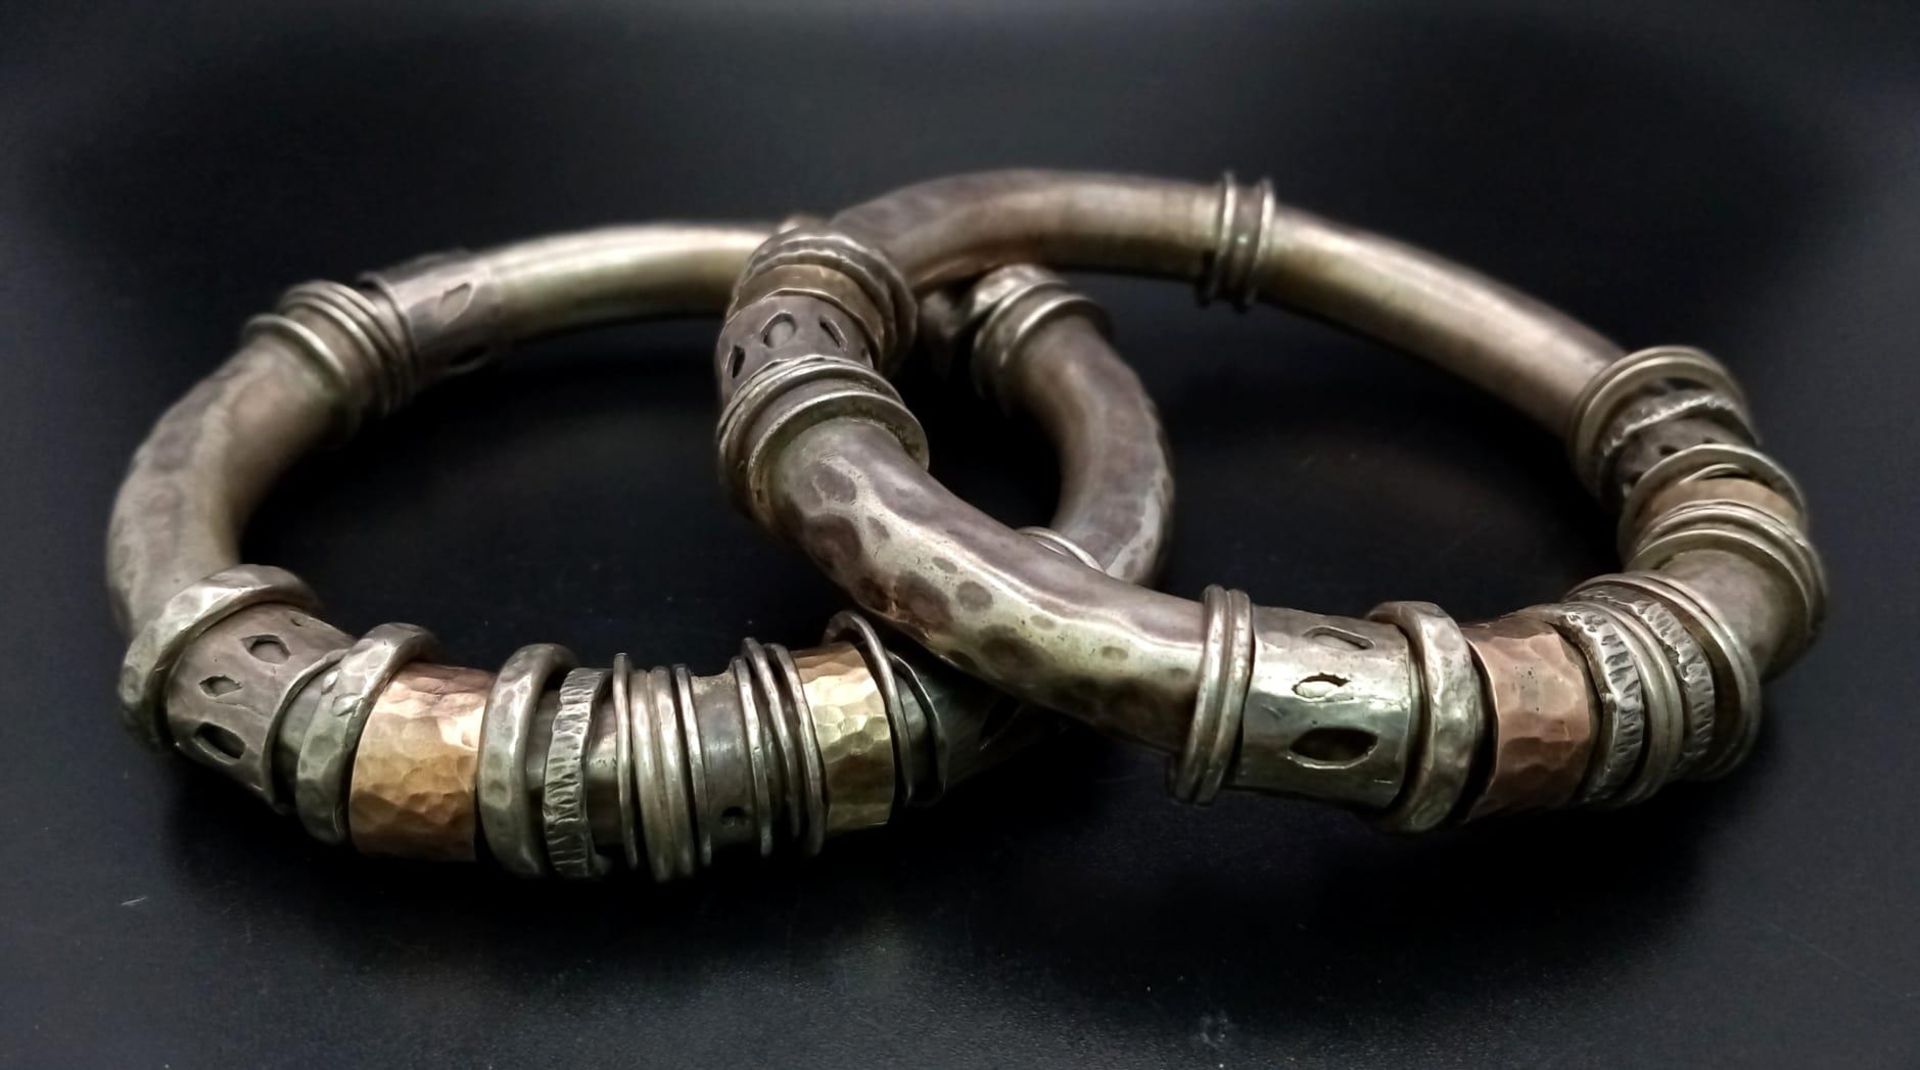 A pair of silver and gold bangles in tubular form with loose ring decoration. The bangles have a